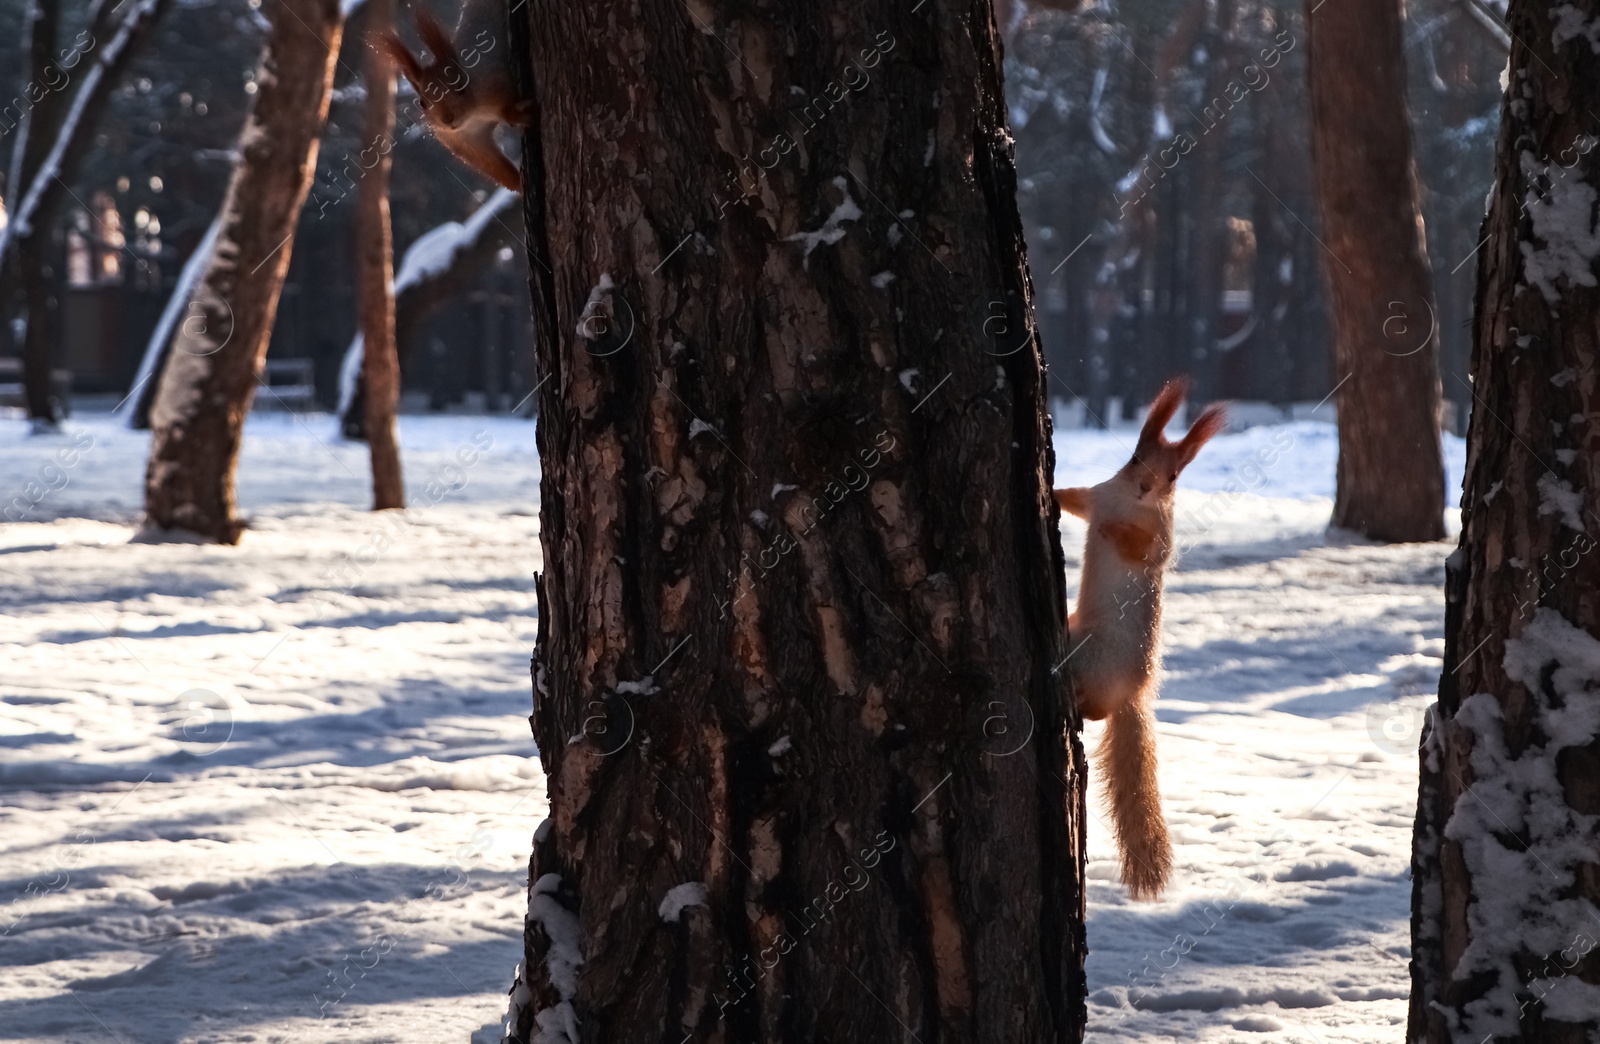 Photo of Cute squirrels on pine tree in winter forest